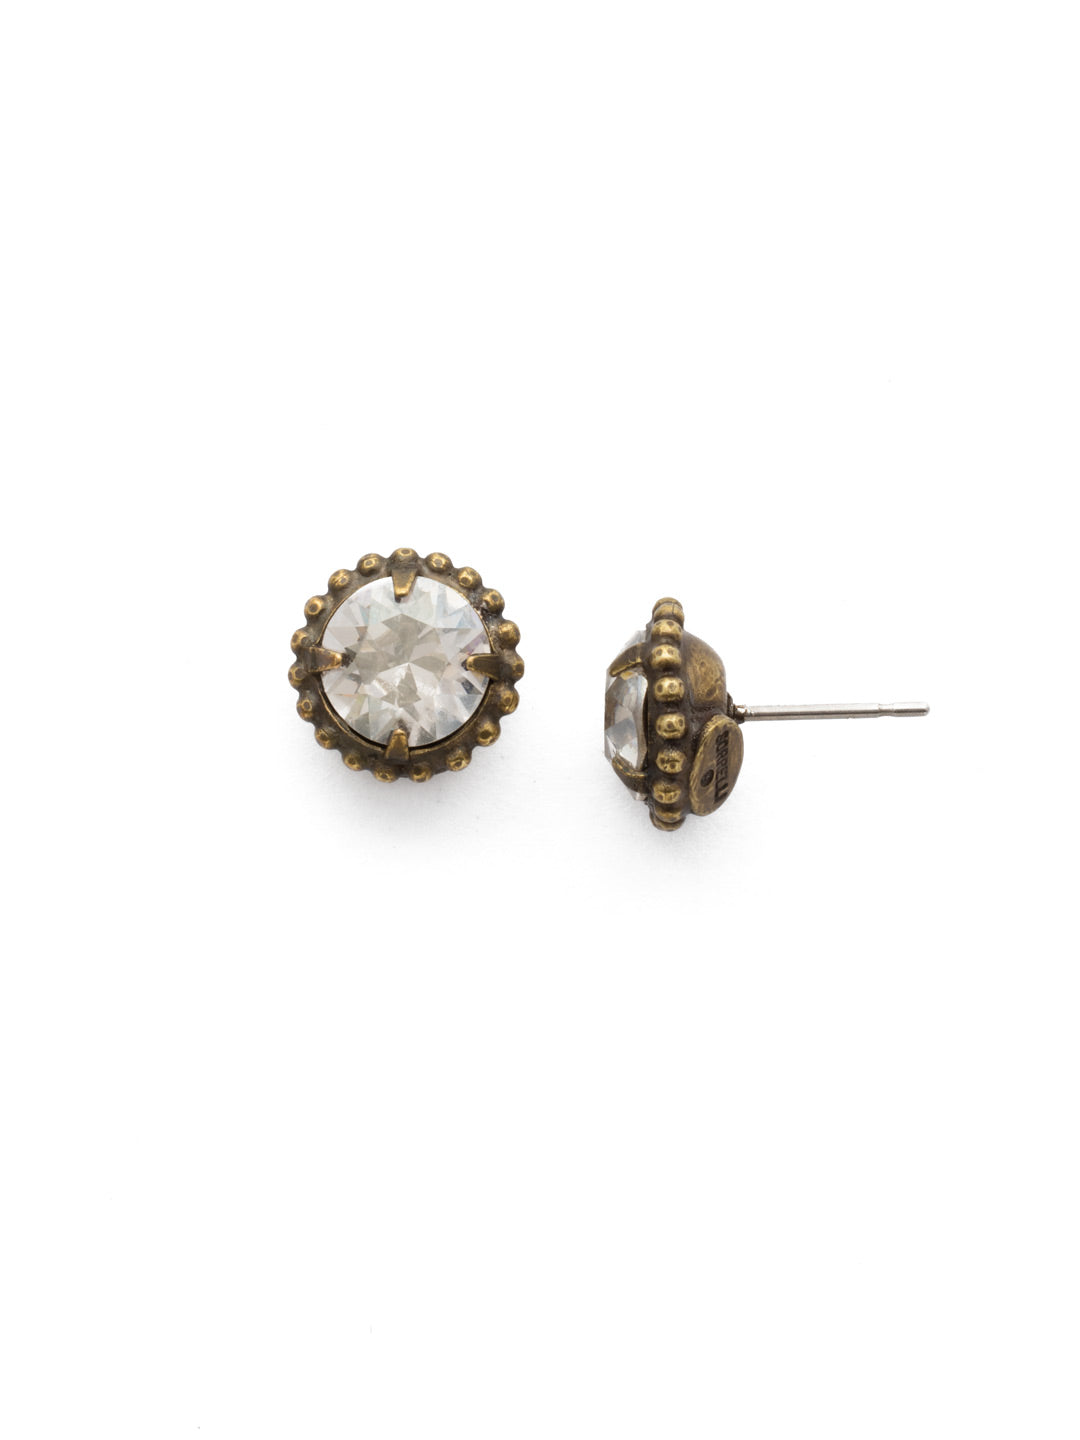 Simplicity Stud Earrings - EBY38AGSSH - <p>A timeless classic, the Simplicity Stud Earrings feature round cut crystals in a variety of colors; accented with a halo of metal beaded detail. Need help picking a stud? <a href="https://www.sorrelli.com/blogs/sisterhood/round-stud-earrings-101-a-rundown-of-sizes-styles-and-sparkle">Check out our size guide!</a> From Sorrelli's Silver Shade collection in our Antique Gold-tone finish.</p>